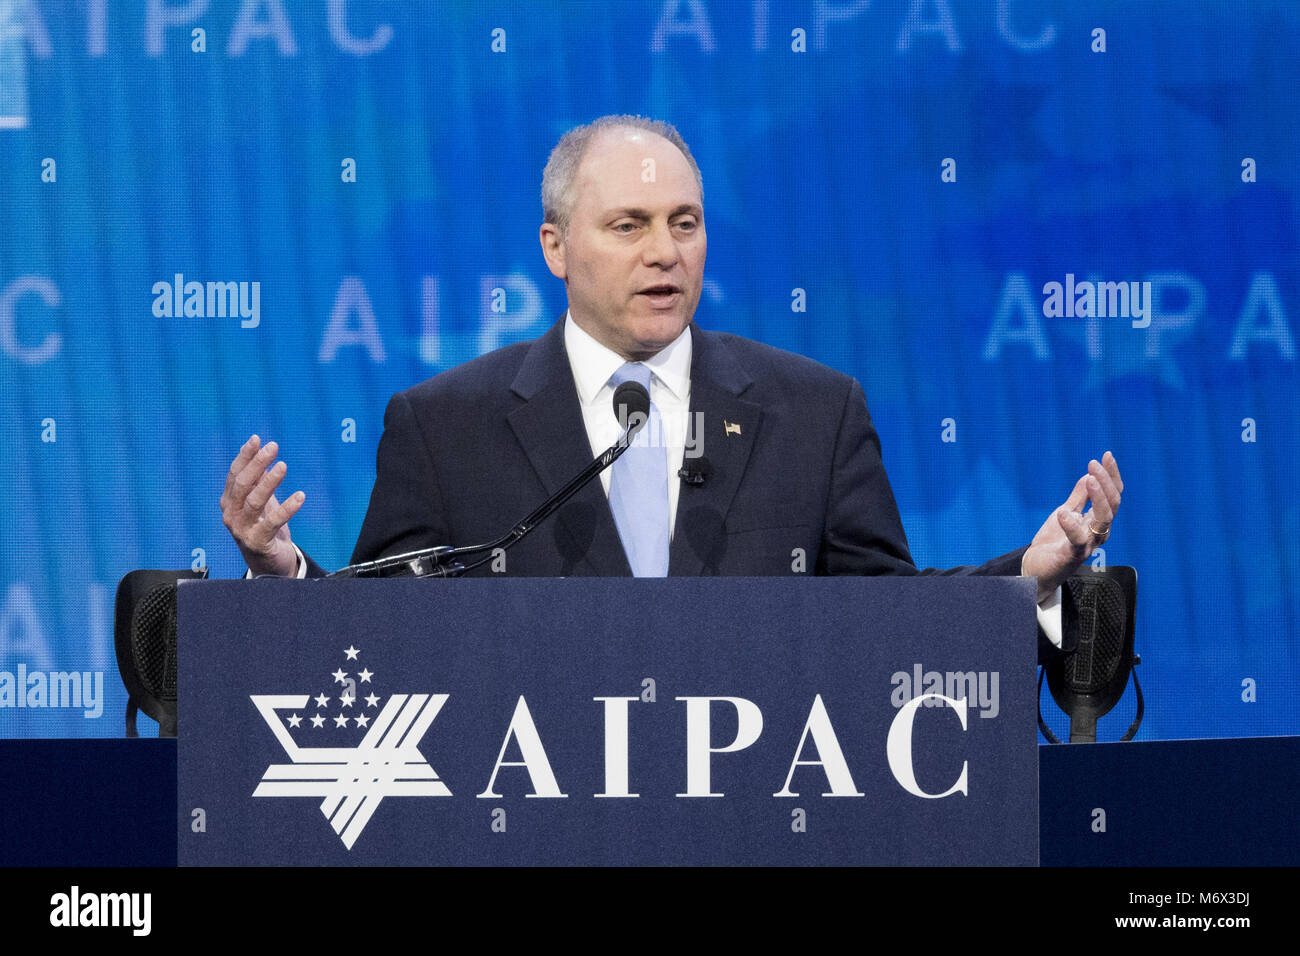 Washington, DC, USA. 6th Mar, 2018. STEVE SCALISE, Representative (R) for Louisiana's 1st congressional district, speaking at the AIPAC (American Israel Public Affairs Committee) Policy Conference at the Walter E. Washington Convention Center in Washington, DC on March 6, 2018 Credit: Michael Brochstein/ZUMA Wire/Alamy Live News Stock Photo